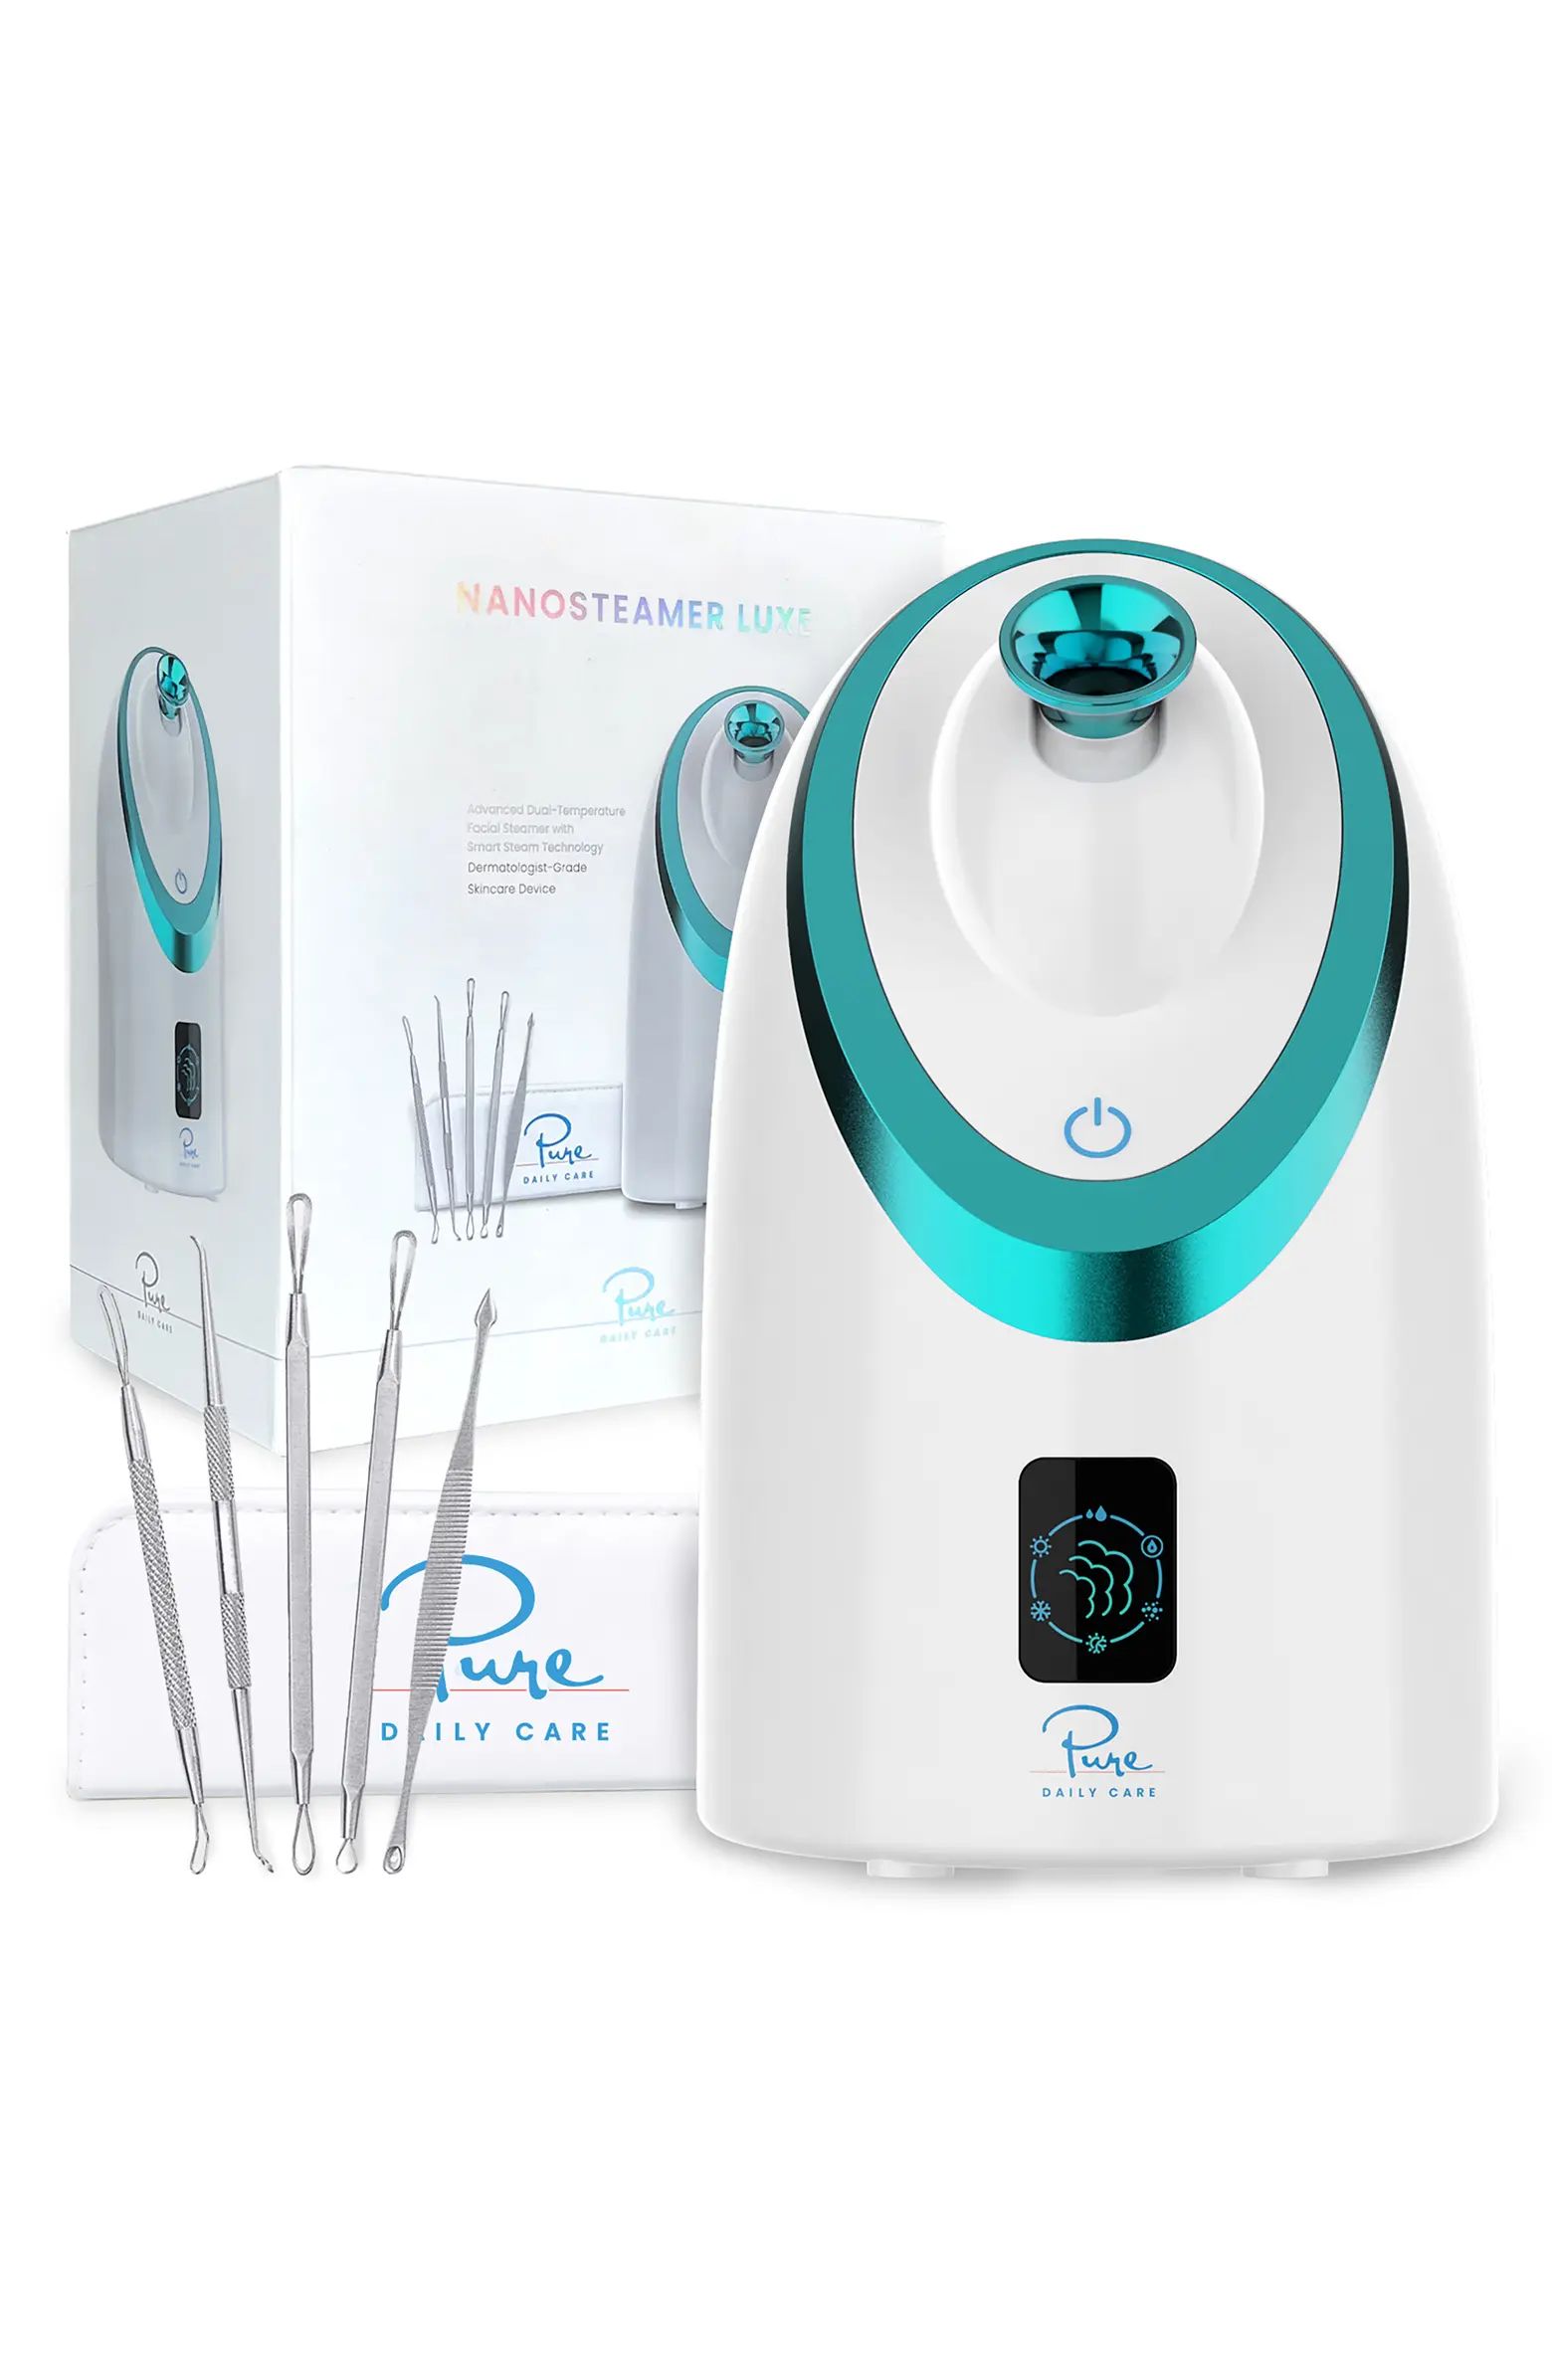 PURE DAILY CARE NanoSteamer Luxe Ionic Facial Steamer & Extractor Kit | Nordstromrack | Nordstrom Rack